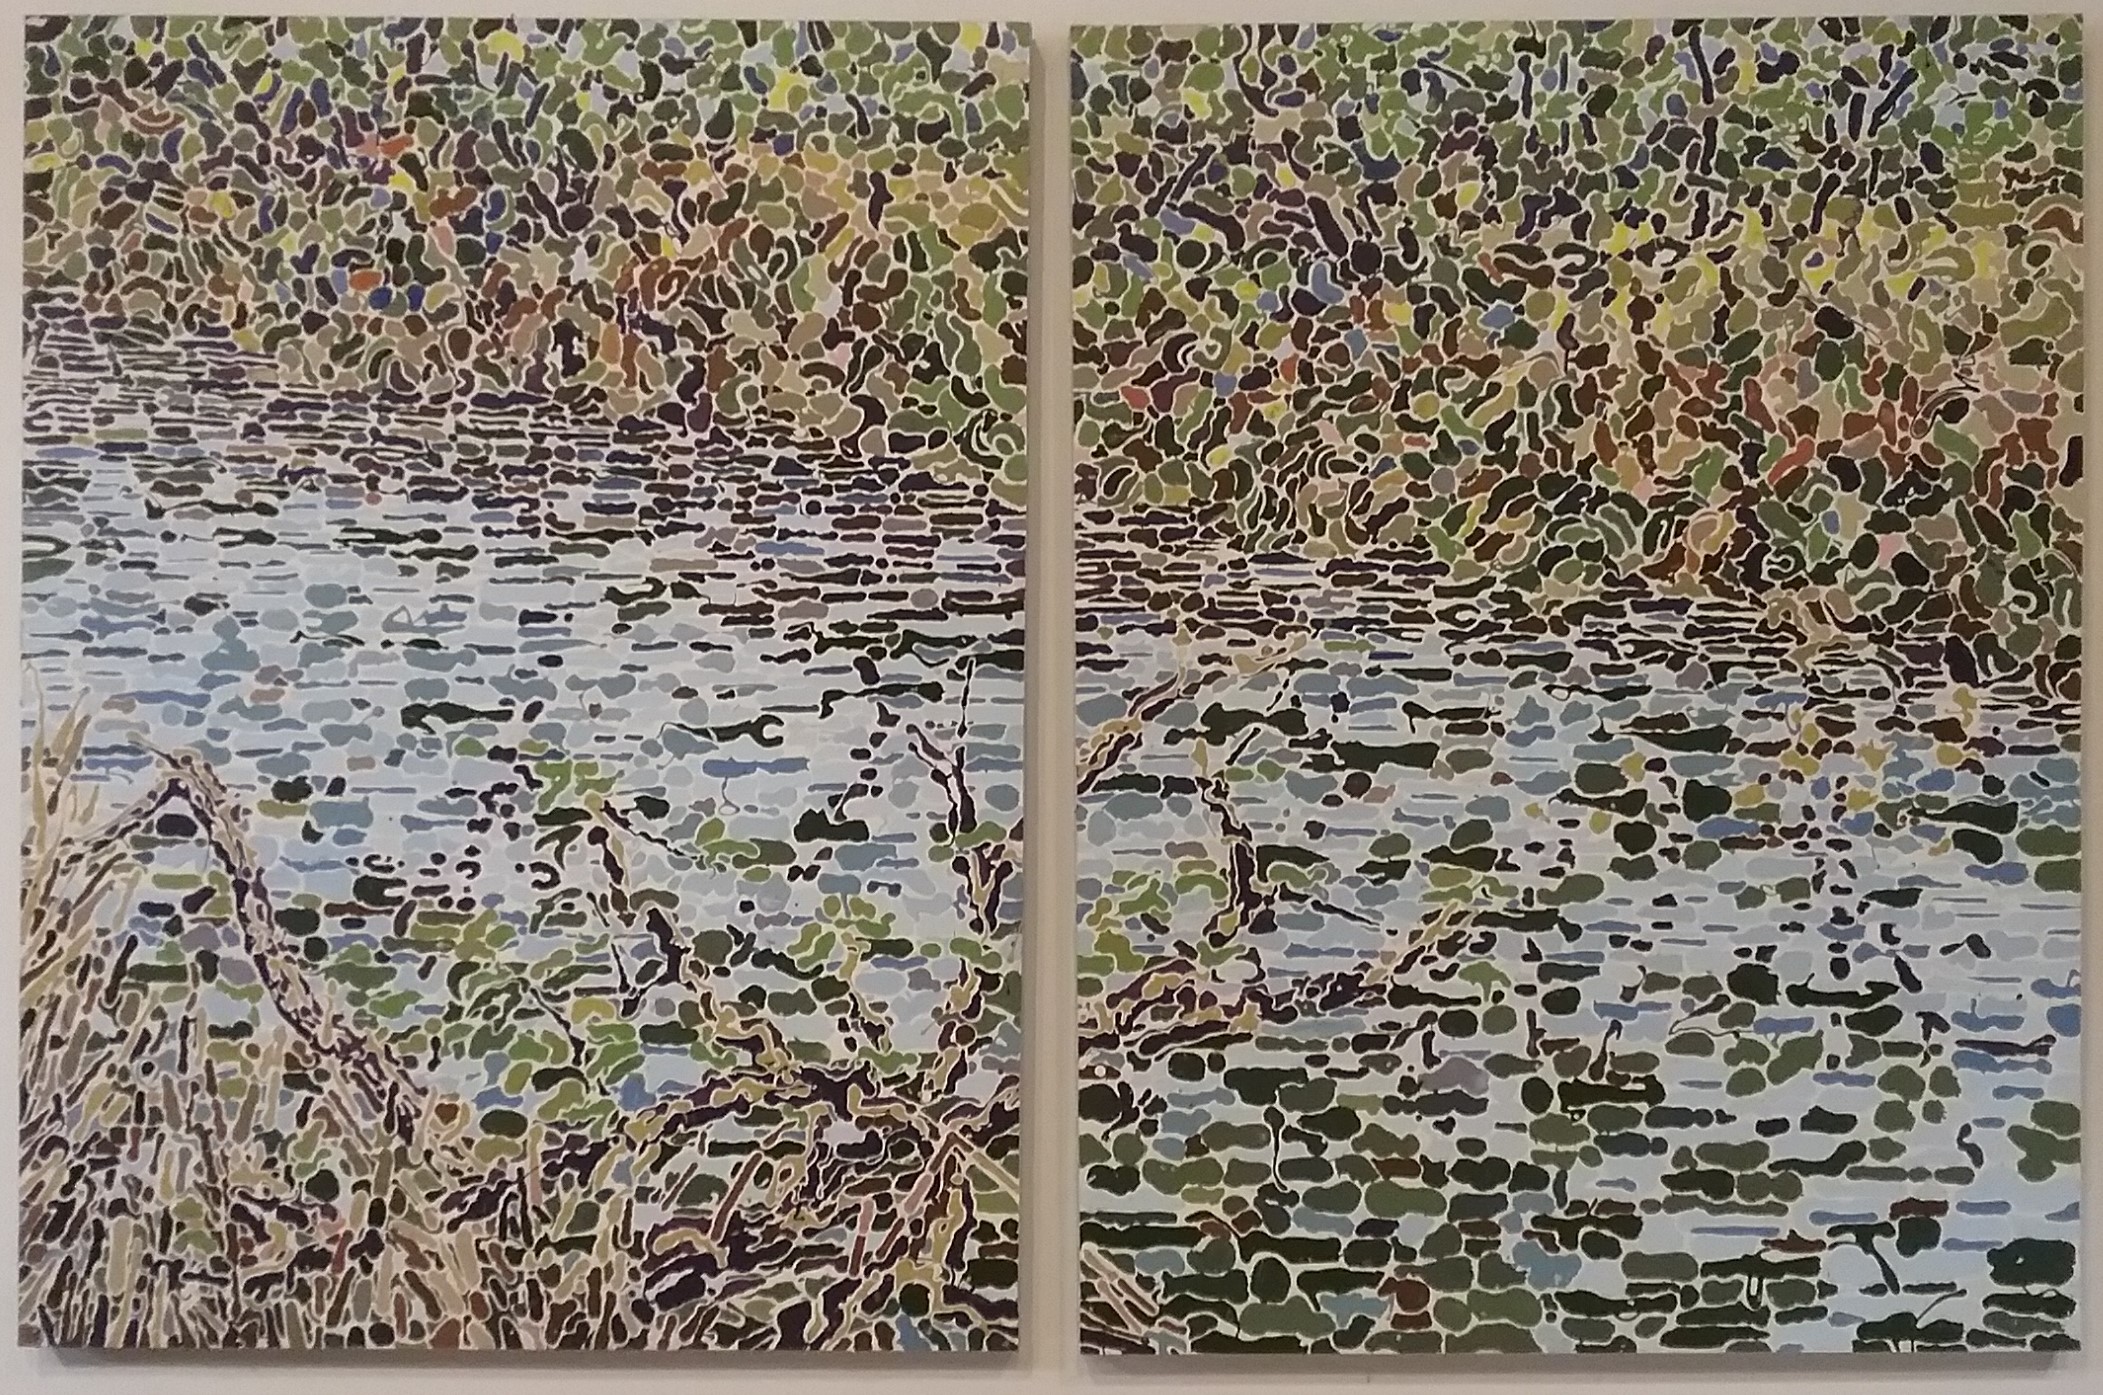 5. River Diptych.